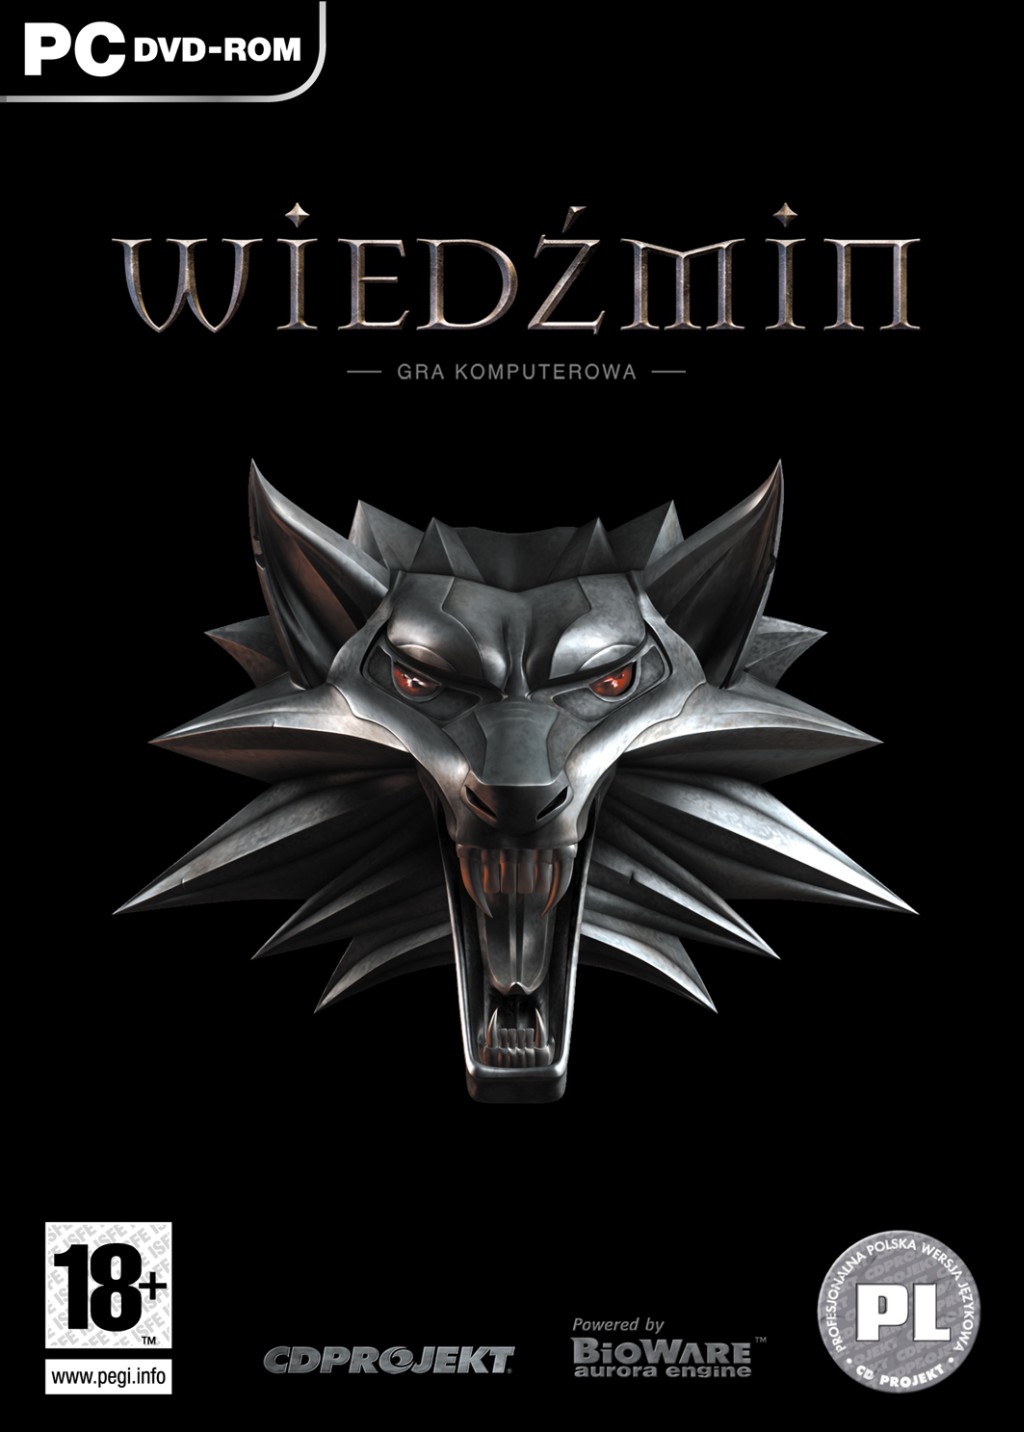 The Witcher (video game series) - Wikipedia